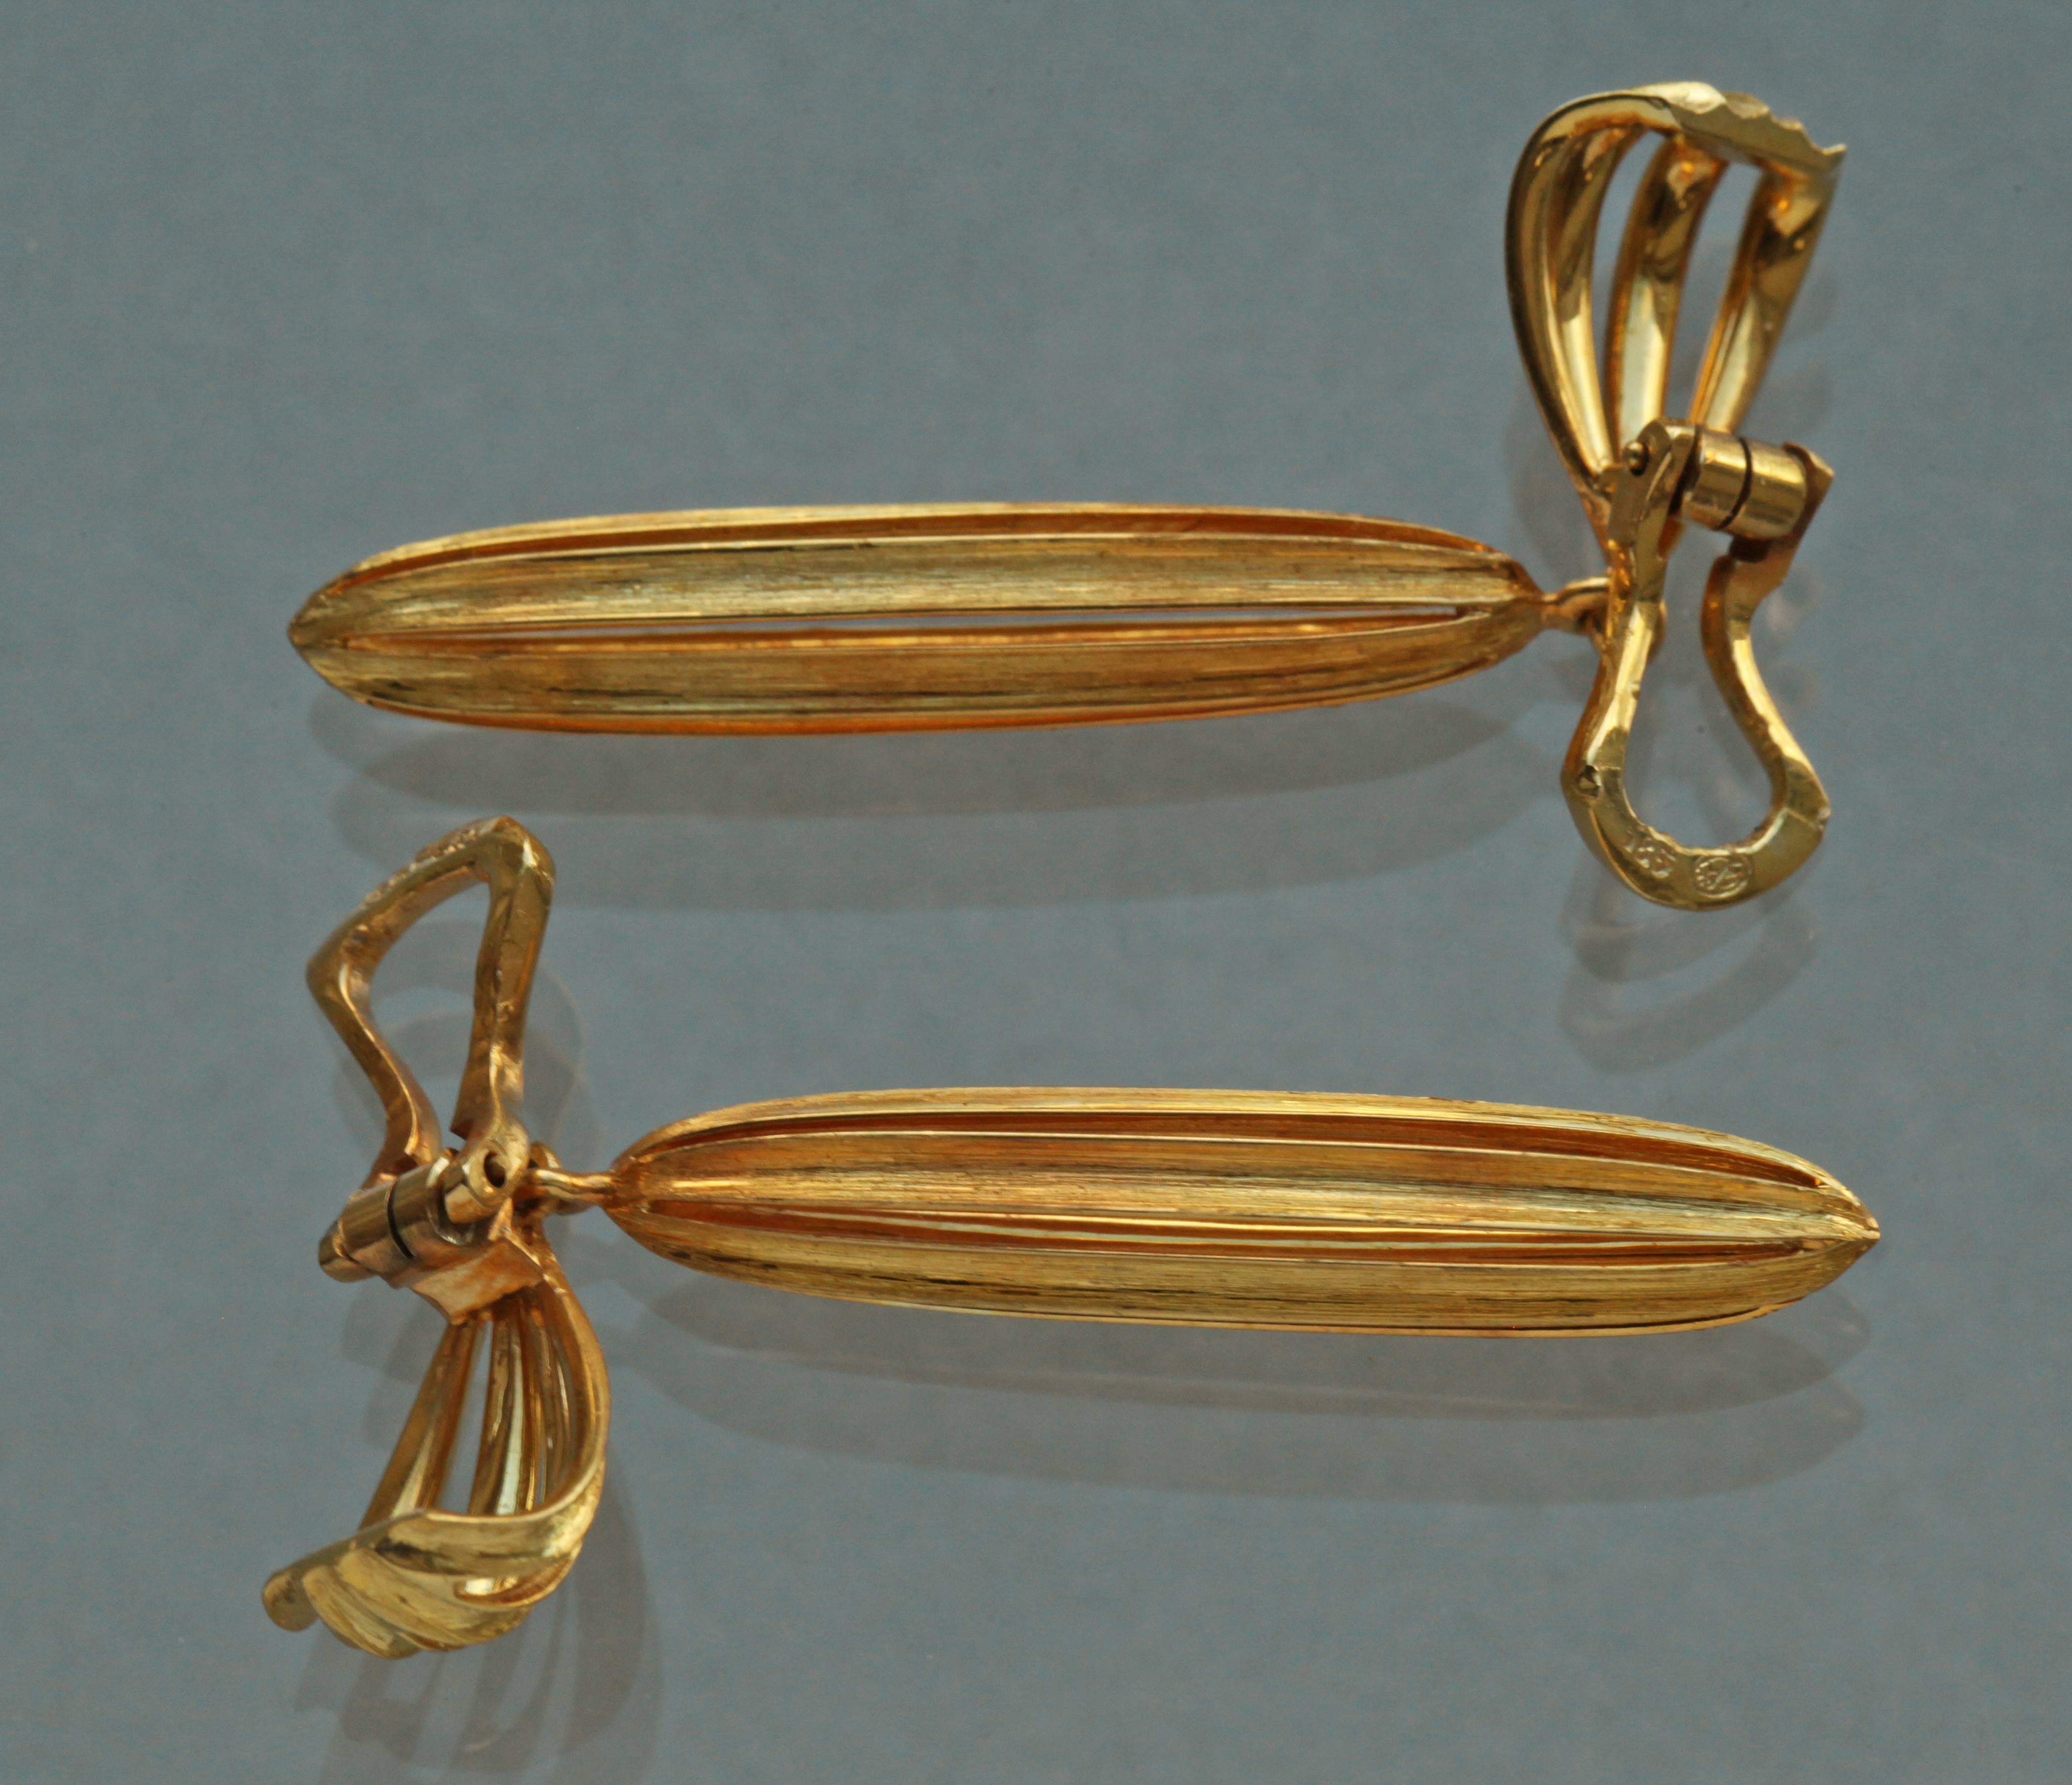 An exceptional pair of gold earrings by the Vienna Jeweler Anton Heldwein. The gorgeous fluted design echo's the 1920's Wiener Werkstätte style of Josef Hoffmann & almost certainly dates from around 1925 to the late 1930's.
Original fitted case